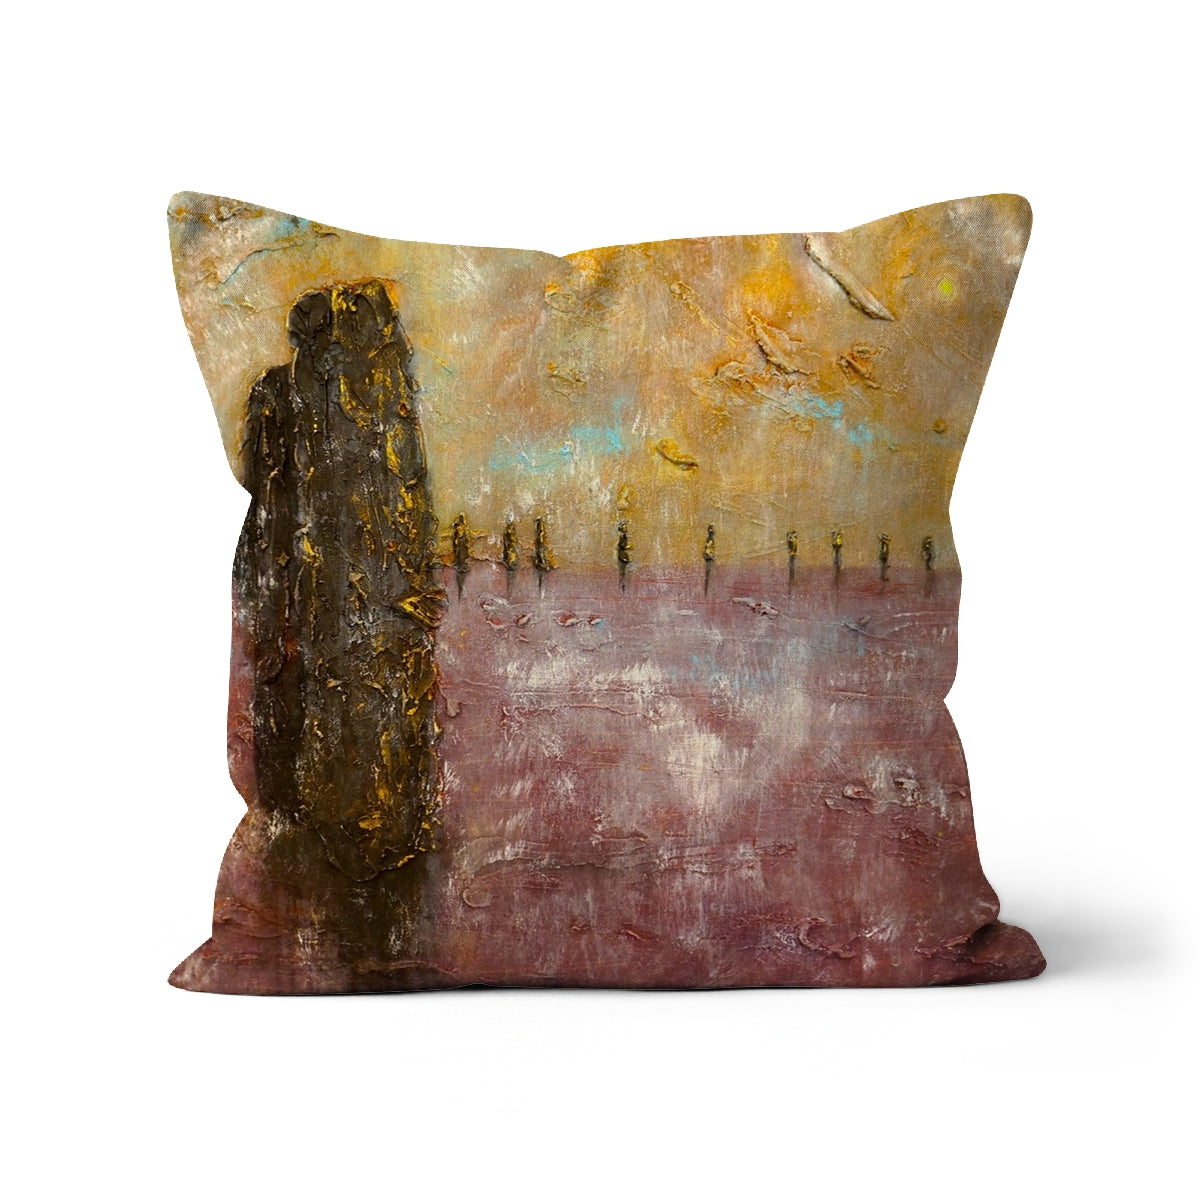 Bordgar Mist Orkney Art Gifts Cushion-Cushions-Orkney Art Gallery-Canvas-18"x18"-Paintings, Prints, Homeware, Art Gifts From Scotland By Scottish Artist Kevin Hunter